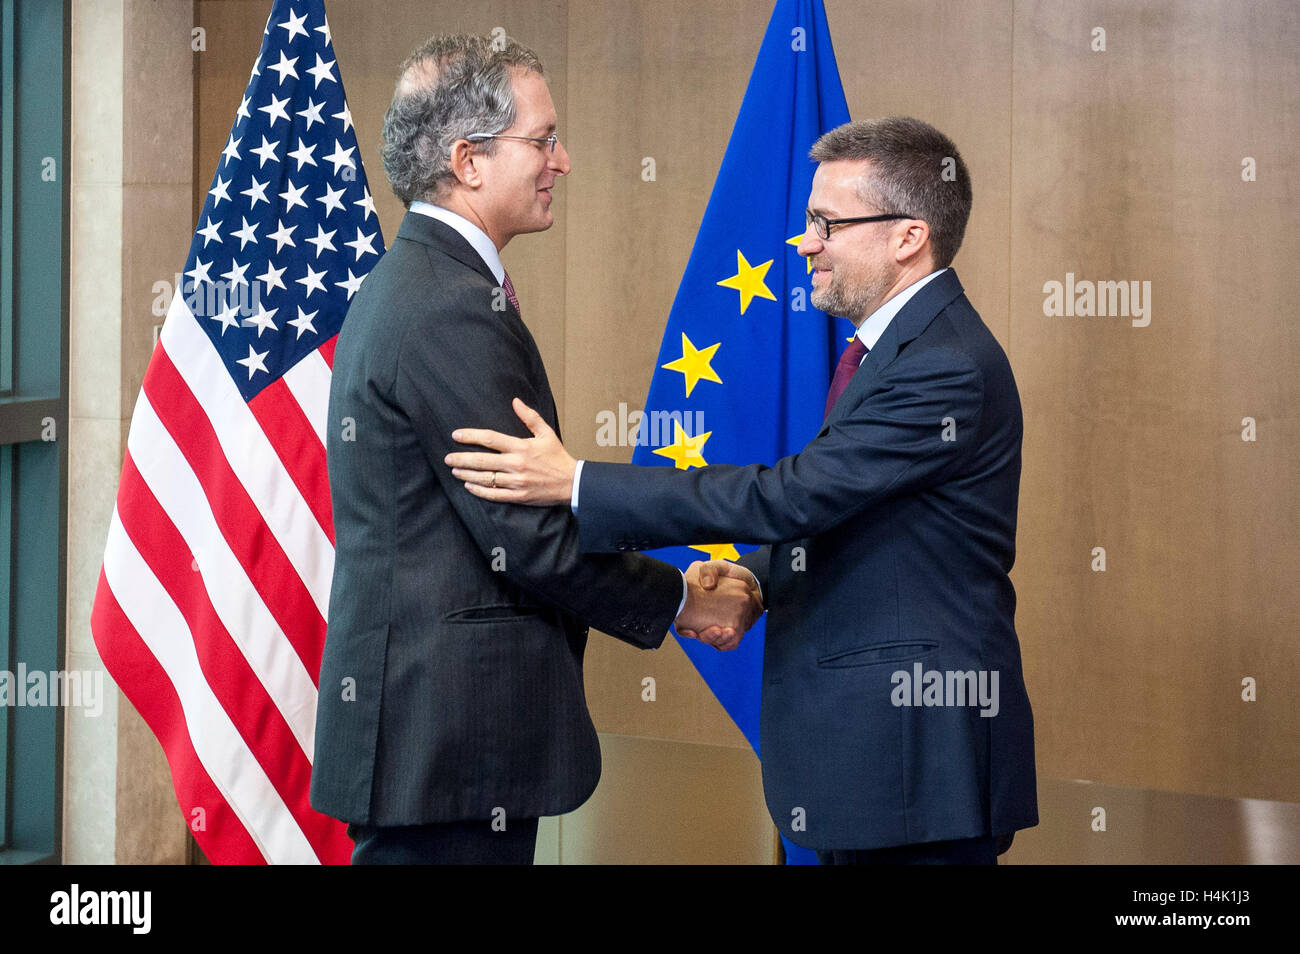 Brussels, Belgium. 17th Oct, 2016. Anthony L. Gardner US Ambassador to EU (L) and Carlos Moedas, EU commissioner for Research, science and innovation during EU-US signing ceremony at European Commission headquarters in Brussels, Belgium on 17.10.2016 EU Commissioner and US Ambassador signed an agreement to facilitate research cooperation between the European Union and the United States within the framework of Horizon 2020 by Wiktor Dabkowski Credit:  Wiktor Dabkowski/ZUMA Wire/Alamy Live News Stock Photo